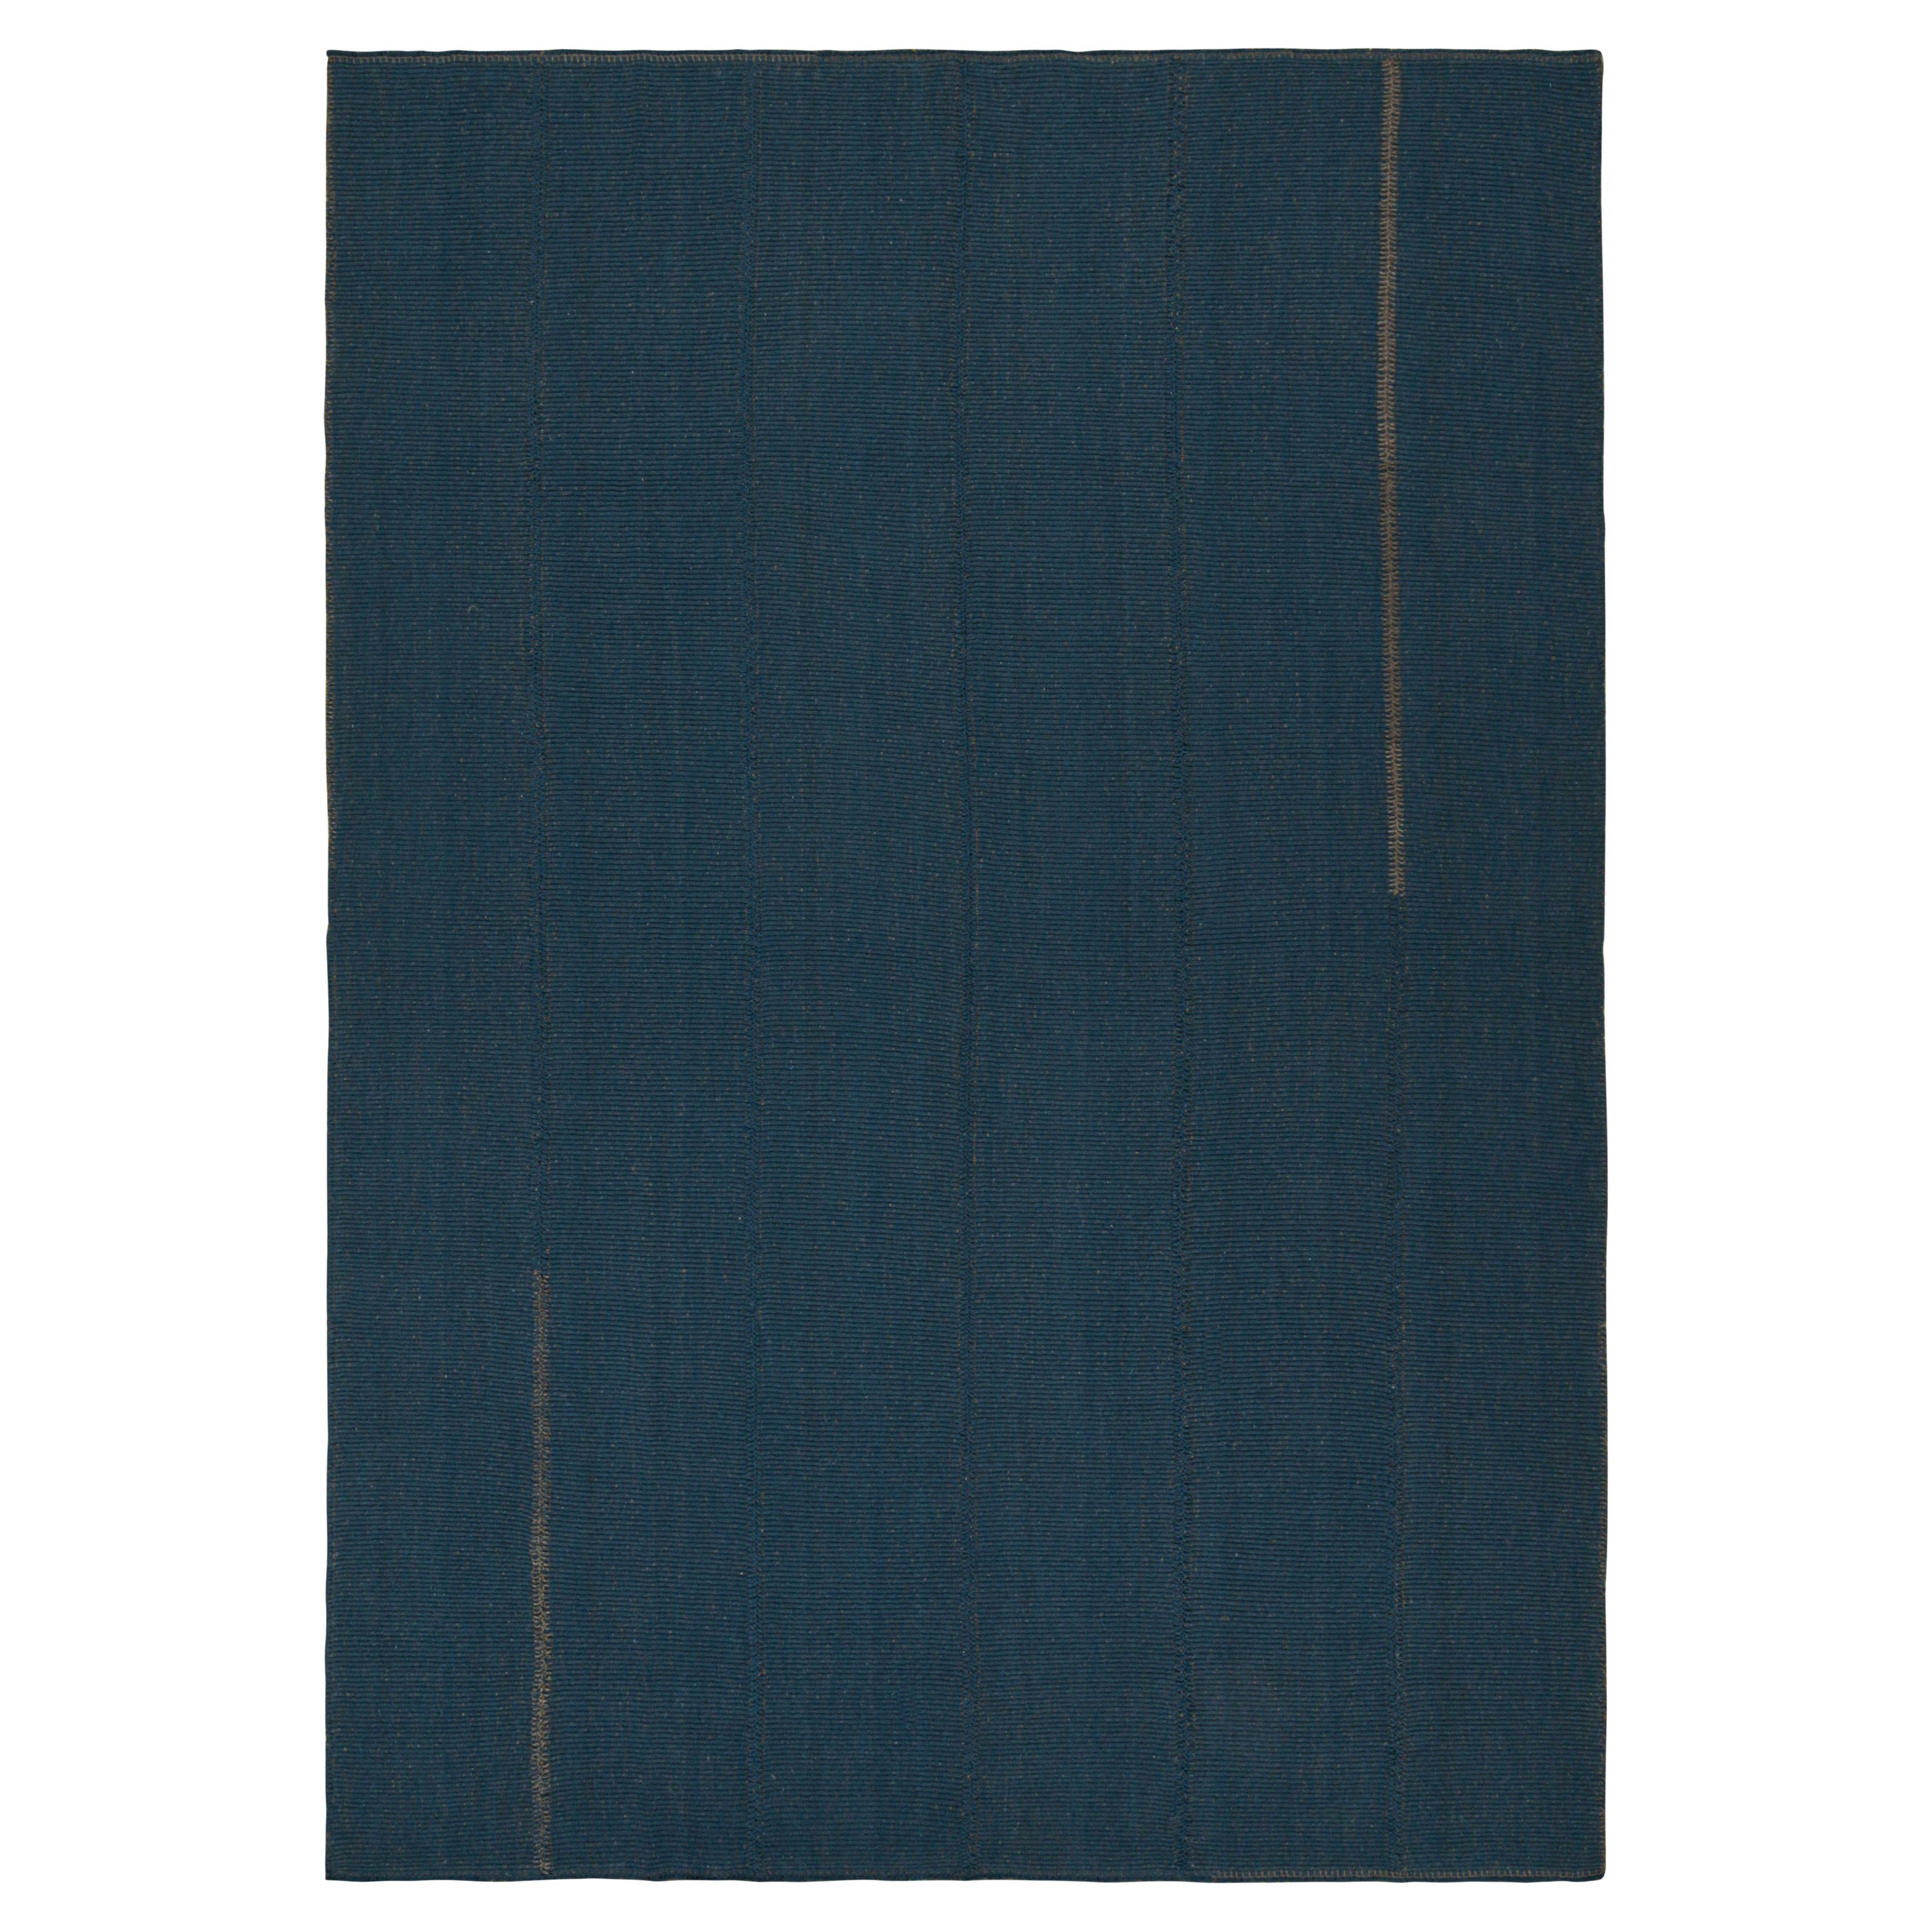 Rug & Kilim’s Contemporary Kilim in Navy Blue with Beige-Brown Accents For Sale